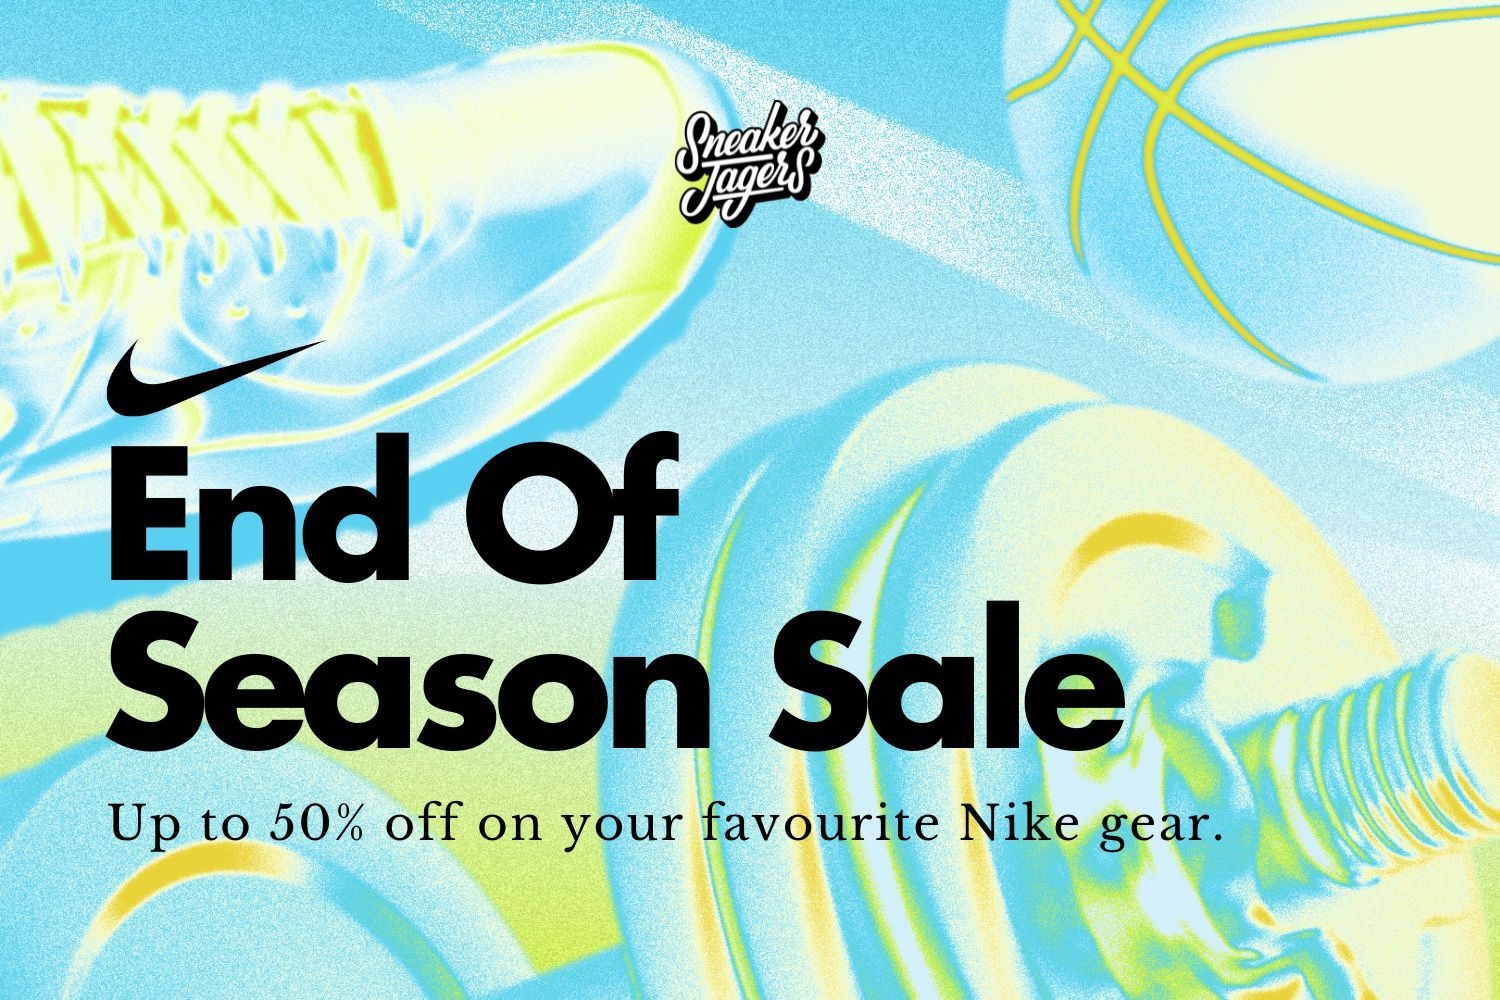 Get up to 50% off during the Nike End of Season Sale